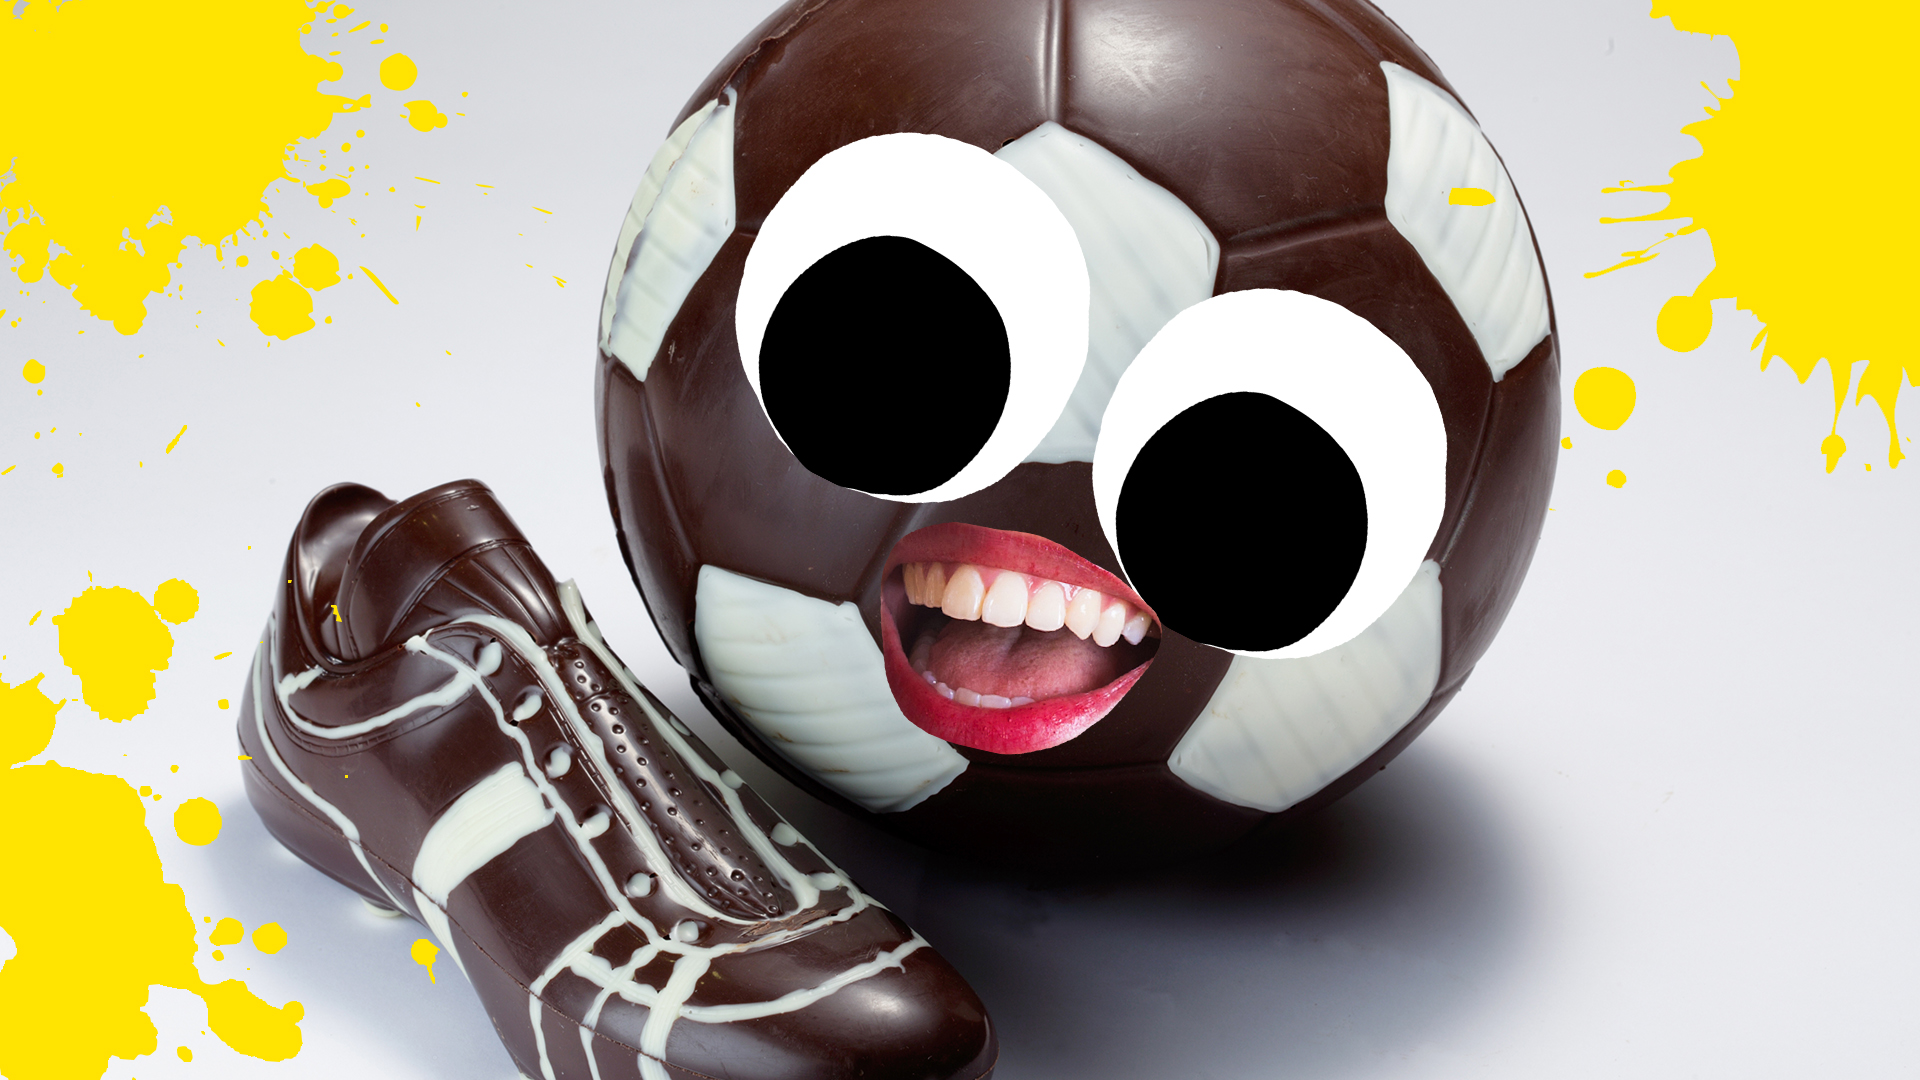 A chocolate football, looking at a chocolate boot